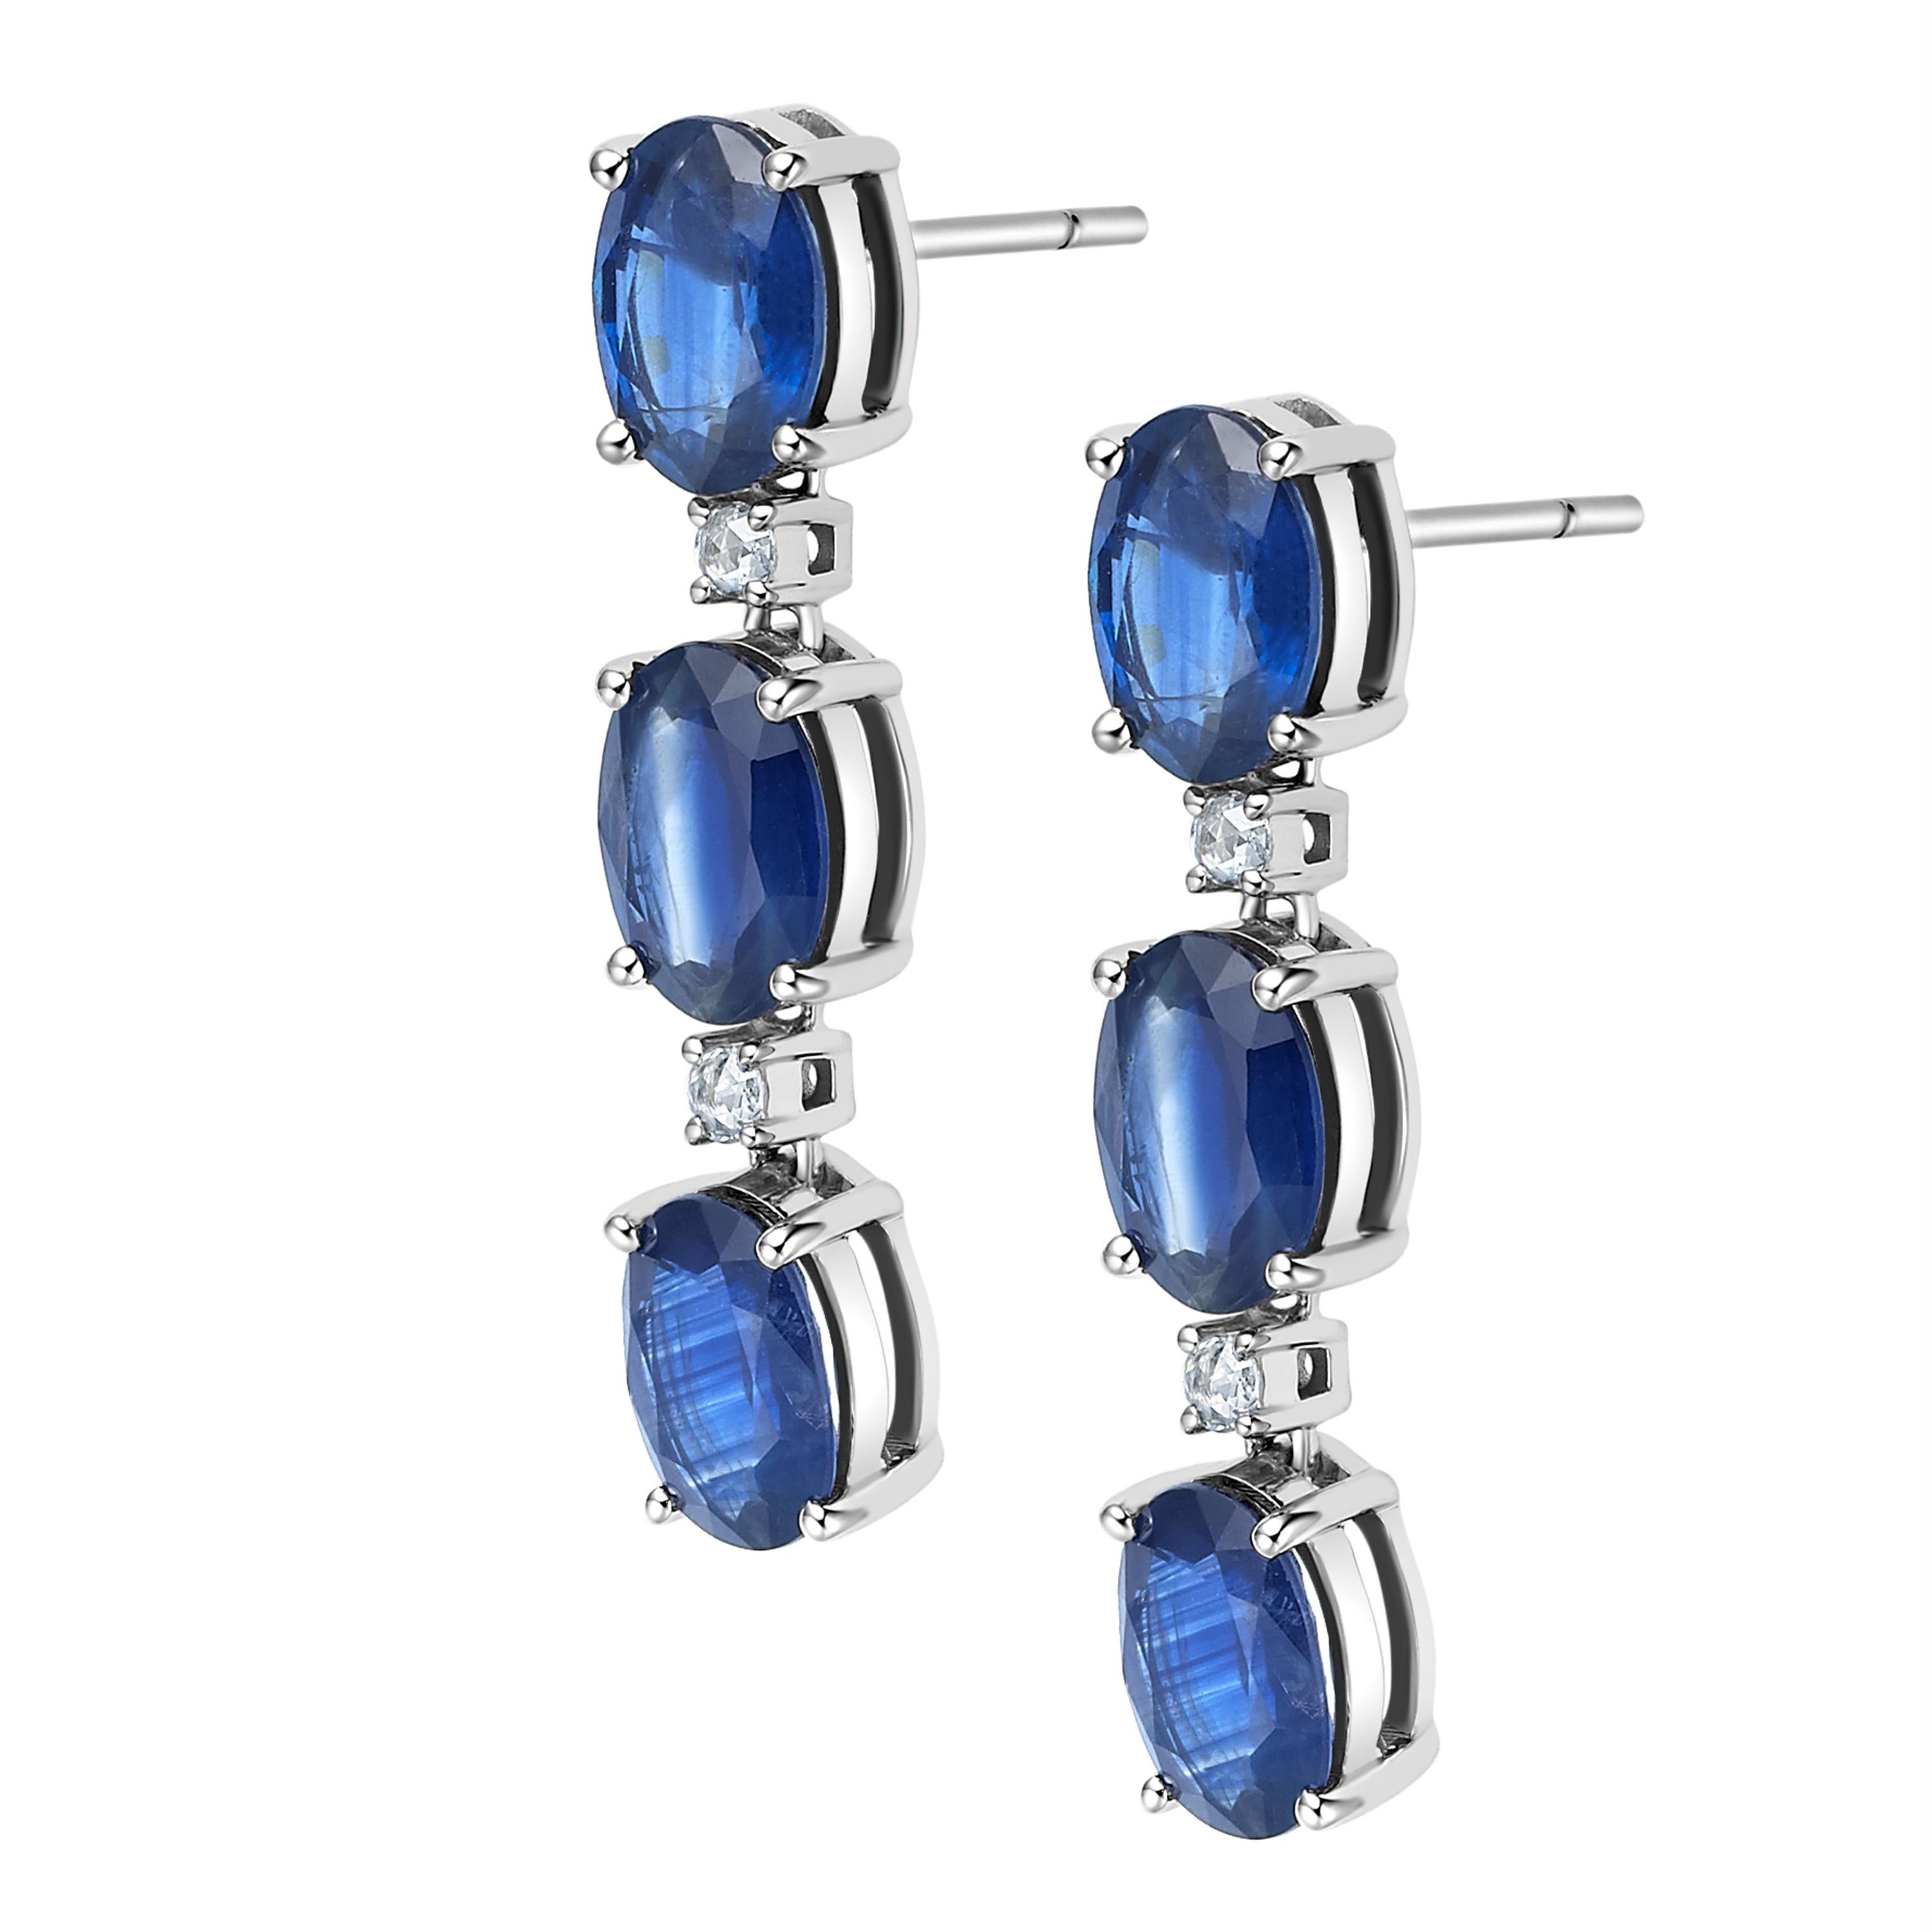 Description:
Drop earrings with 5.23ct blue sapphires and 0.068ct white diamonds, set in 18ct white gold.

Inspiration:
Often times the beauty of a gemstone speaks for itself. This is the case of the deep royal blue sapphire. Sapphires come in a